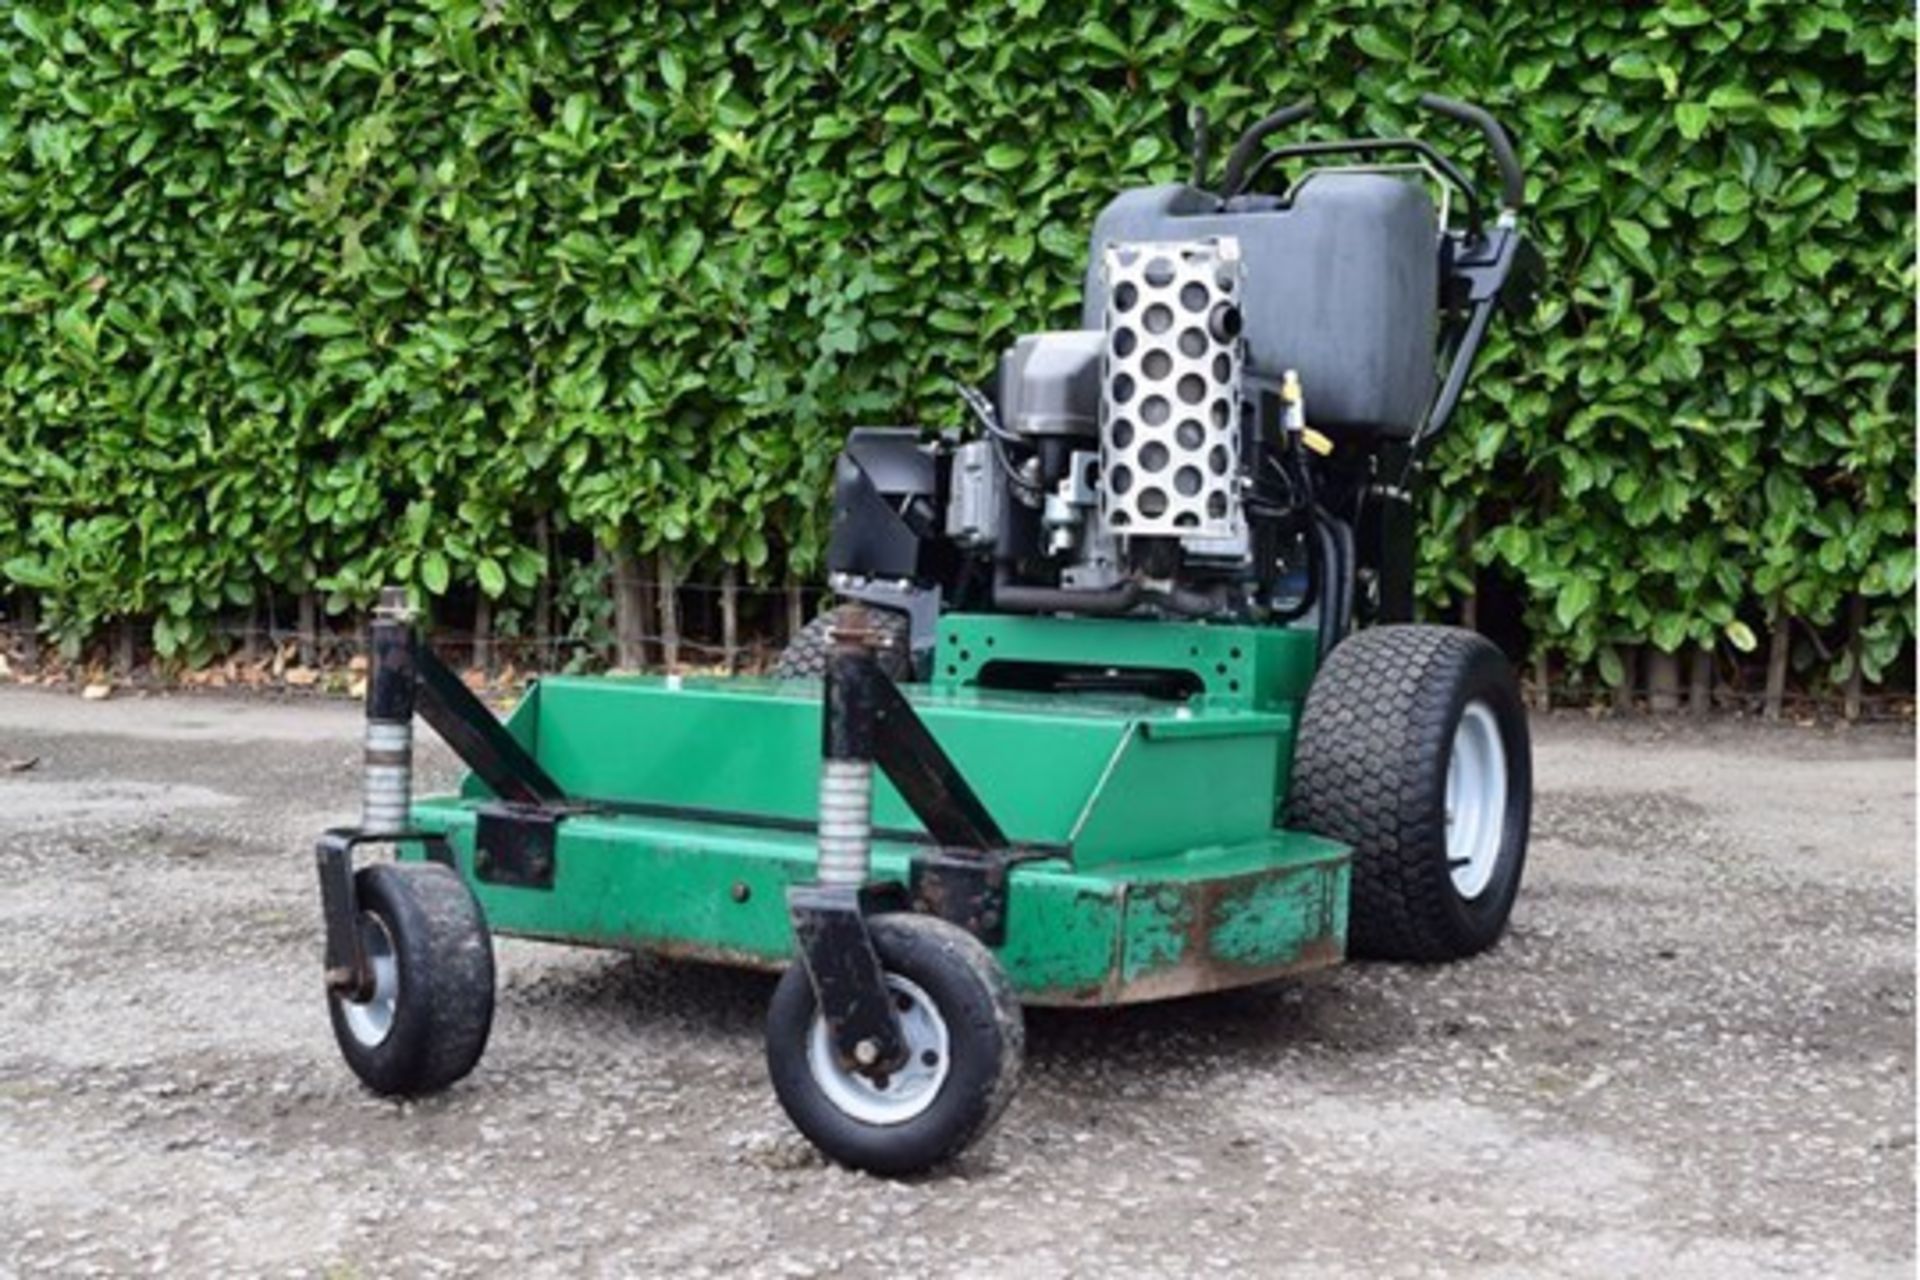 2011 Ransomes Pedestrian 36" Commercial Mower - Image 5 of 8